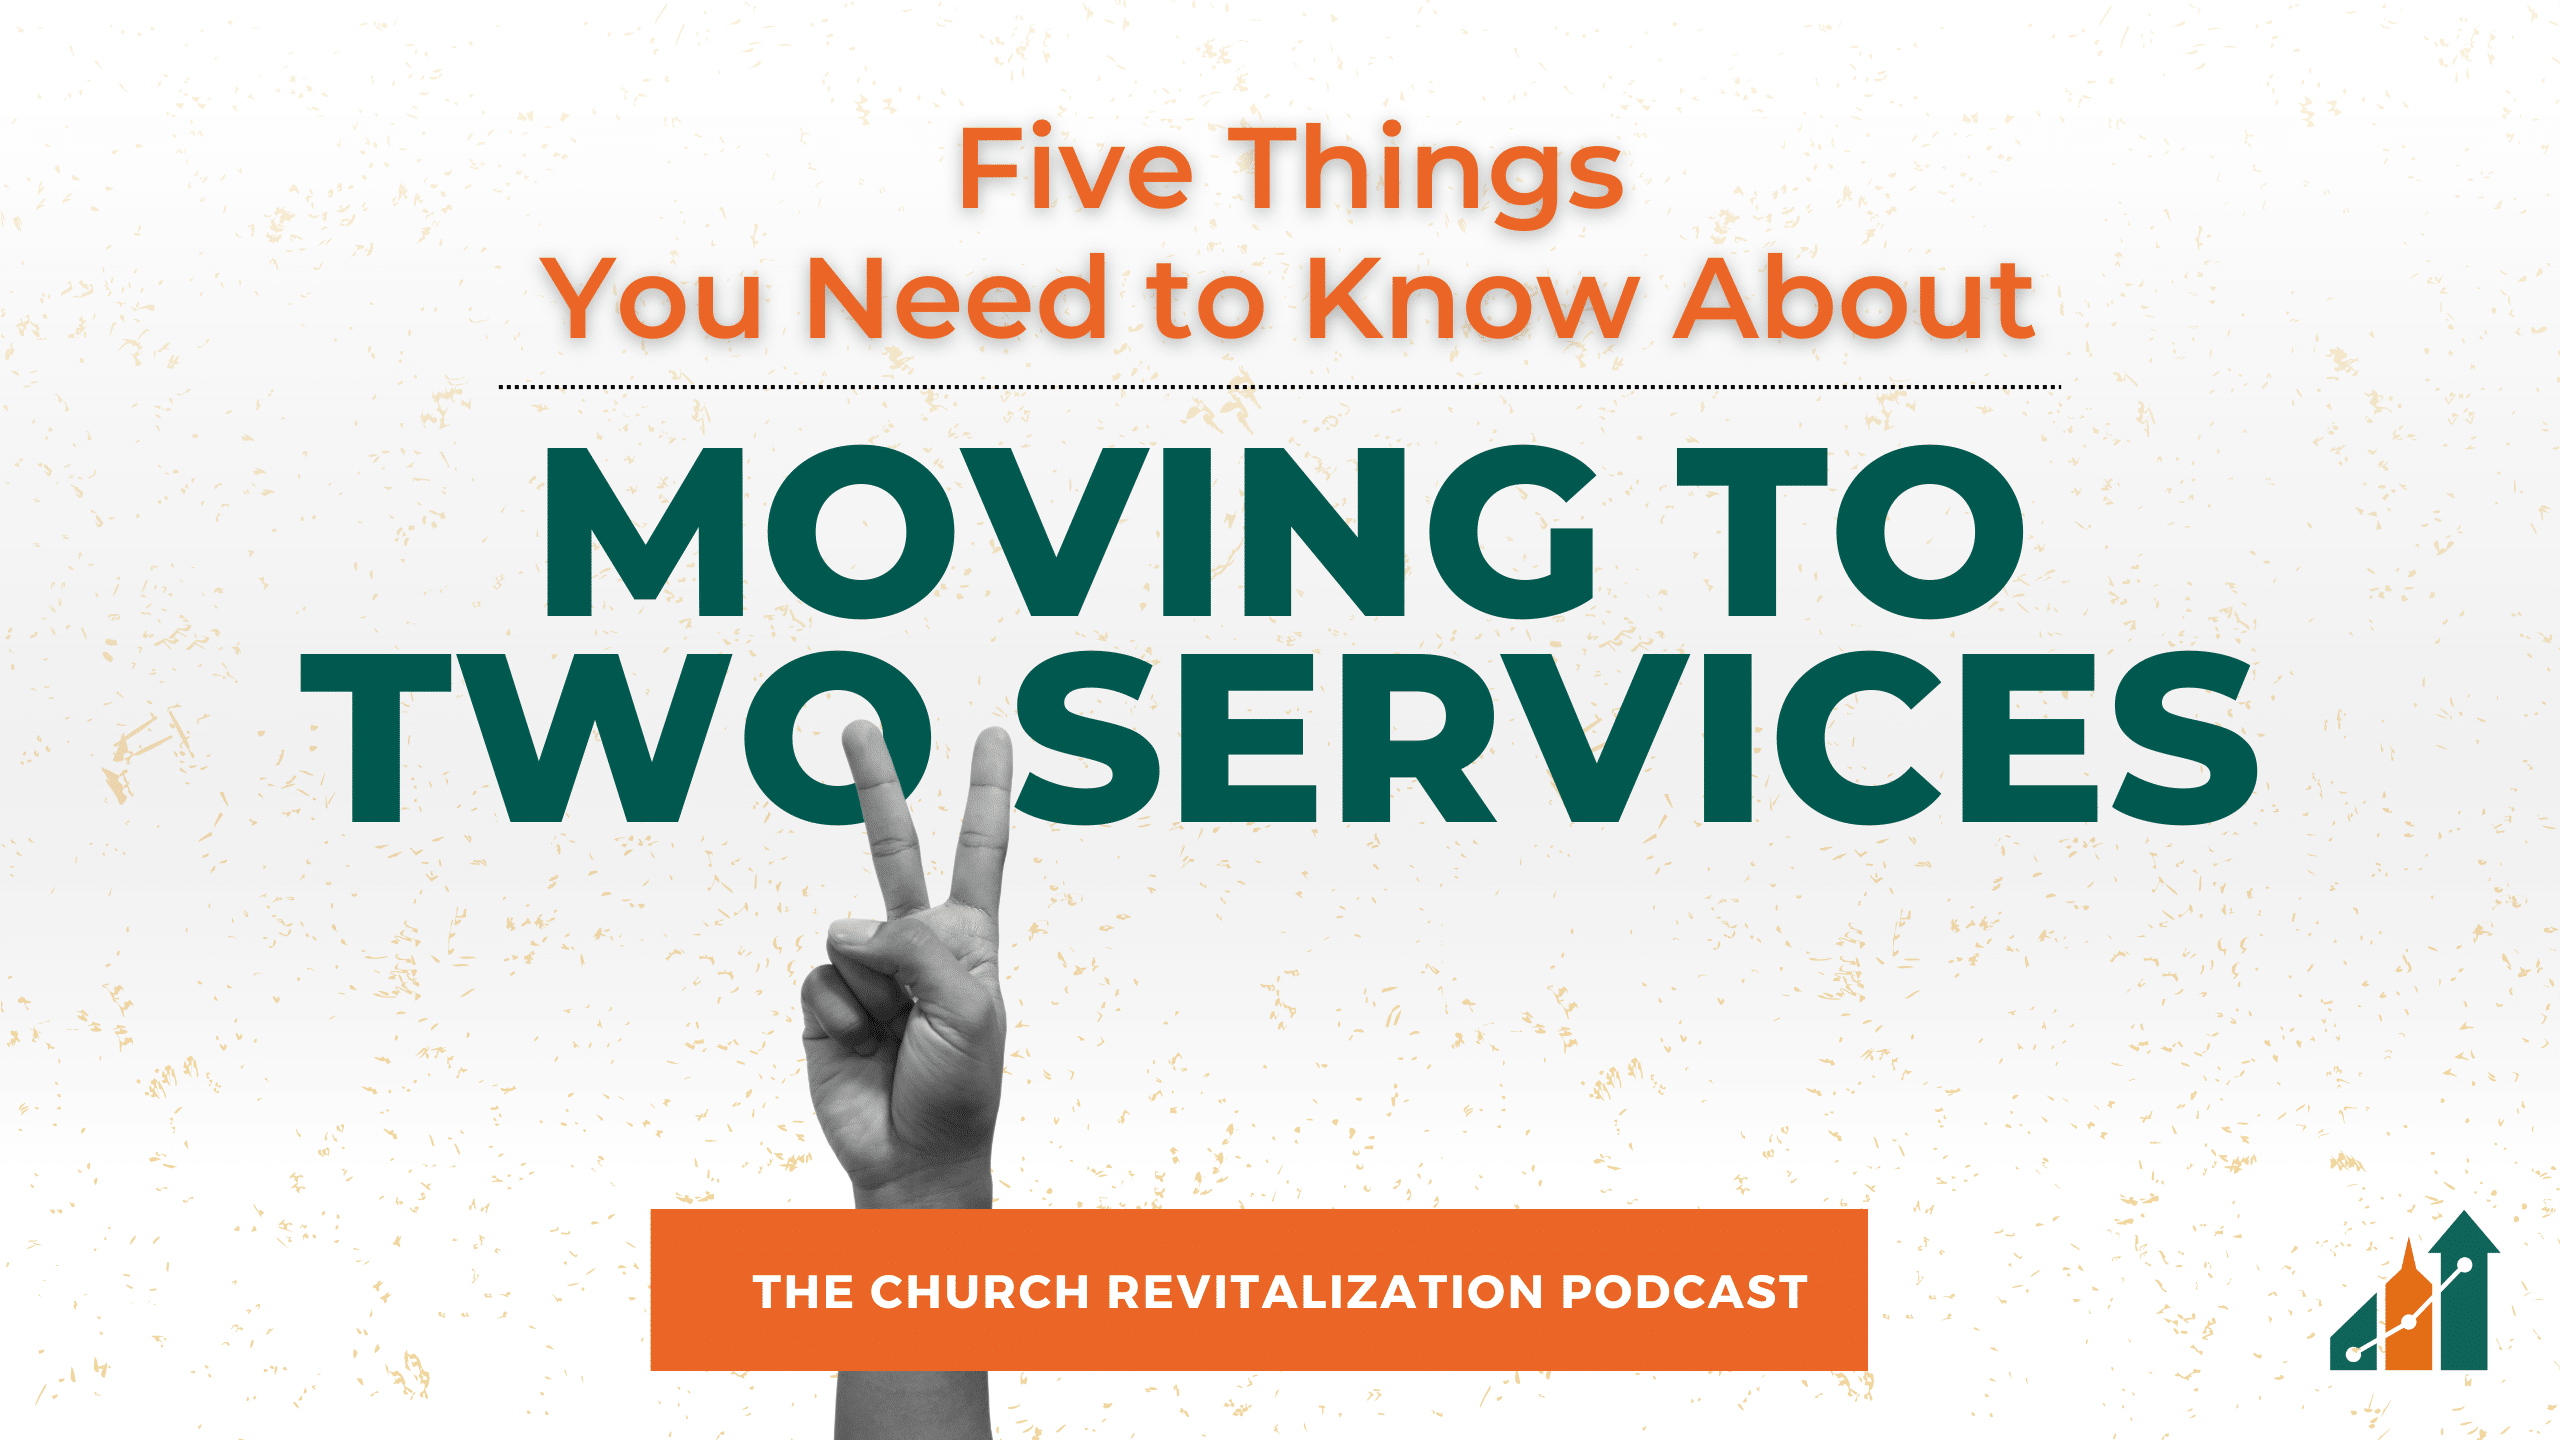 Five Things You Need to Know About Moving to Two Services